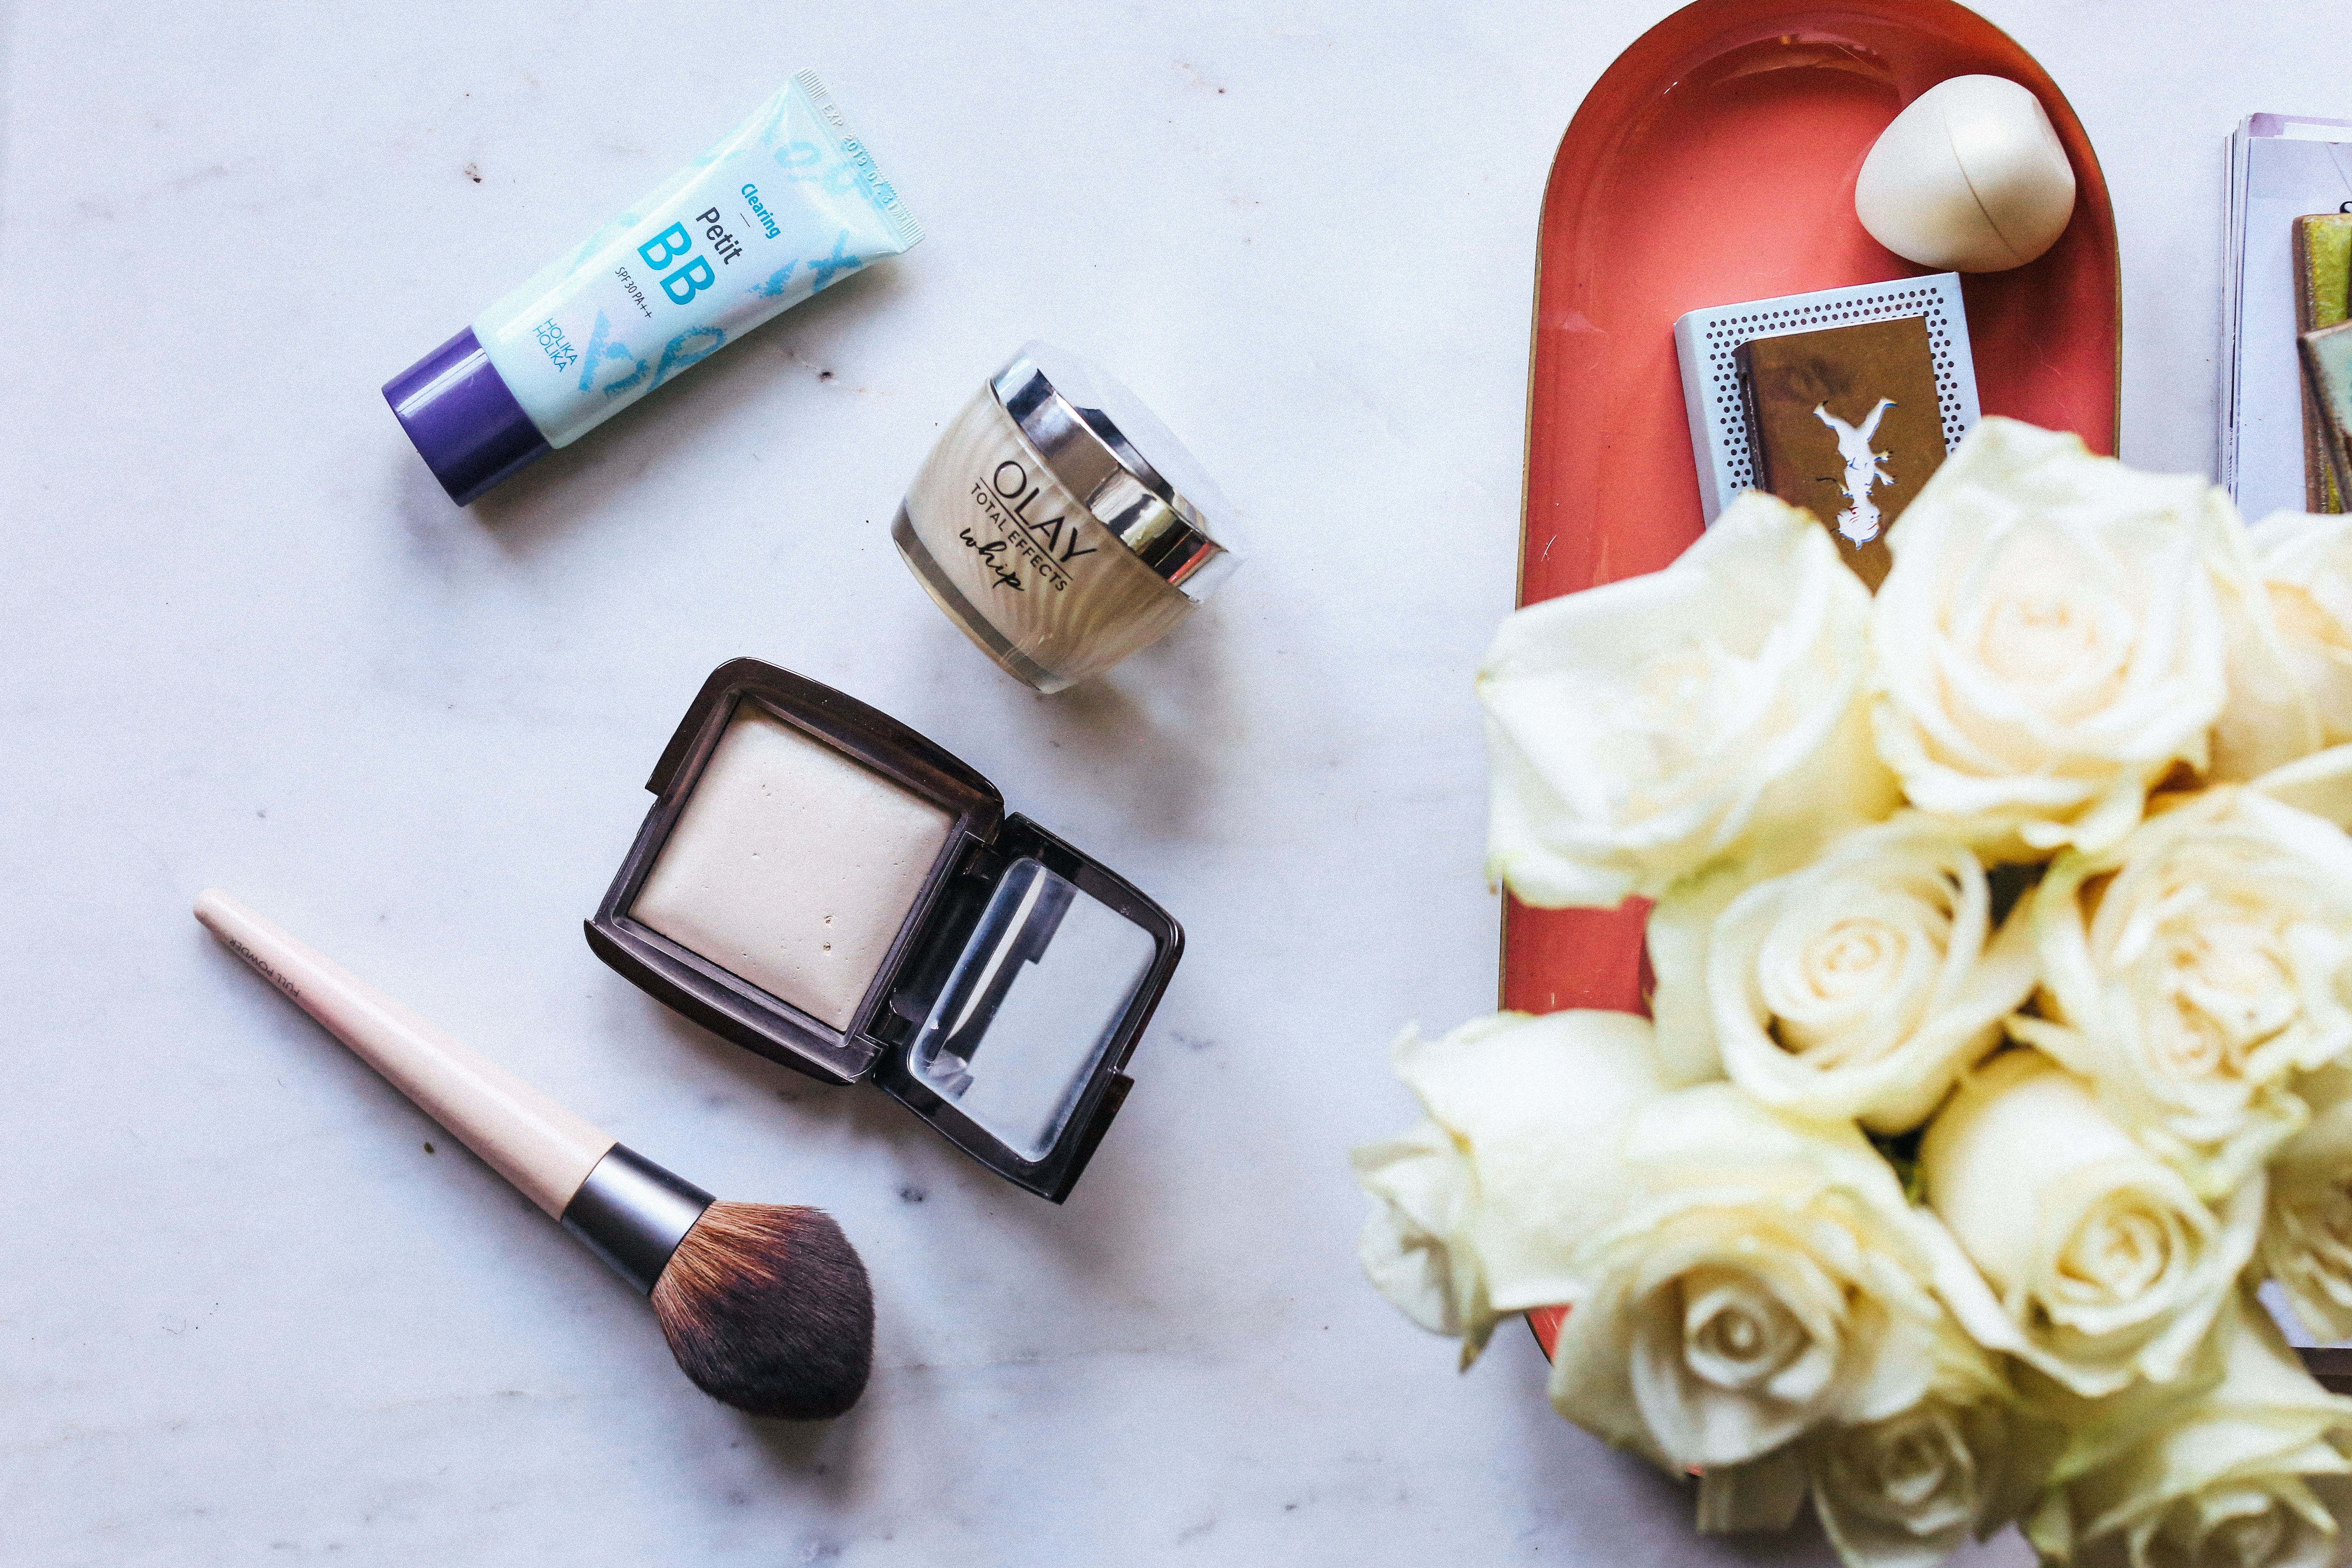 My Fuss Free Beauty Routine with Olay Whips Moisturizer.